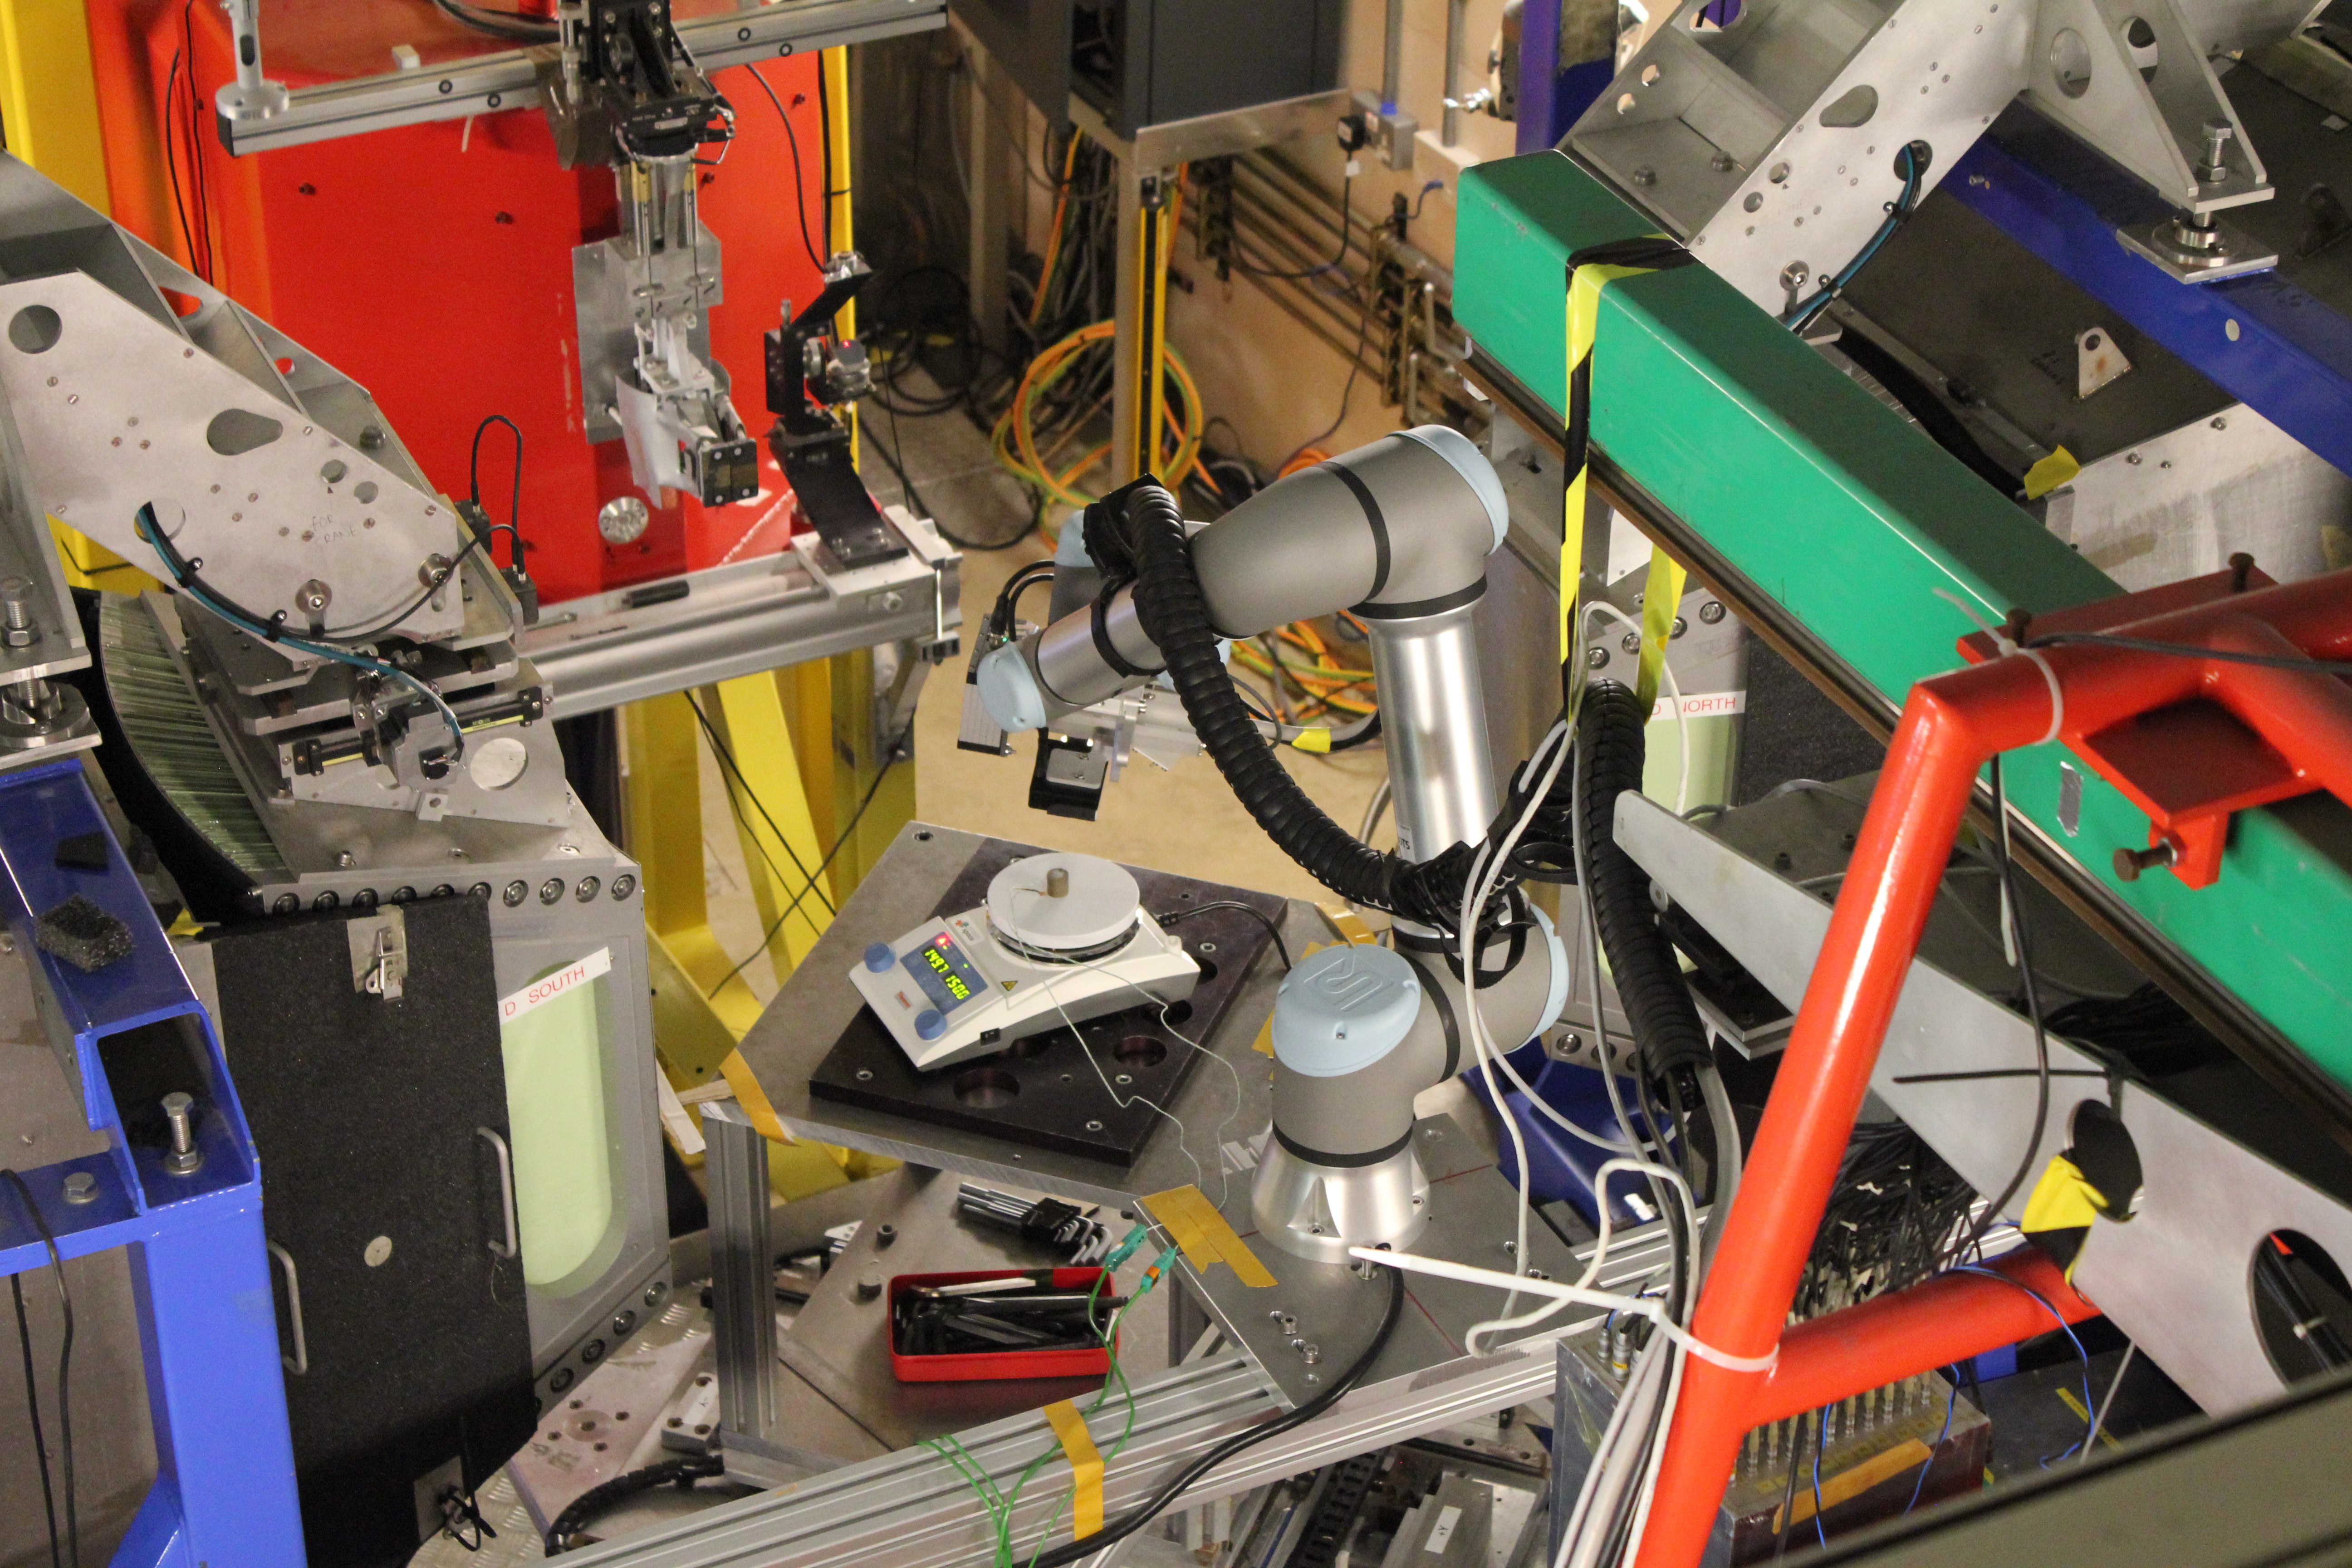 Sample mounted on Engin-X with x-Ray robot in place